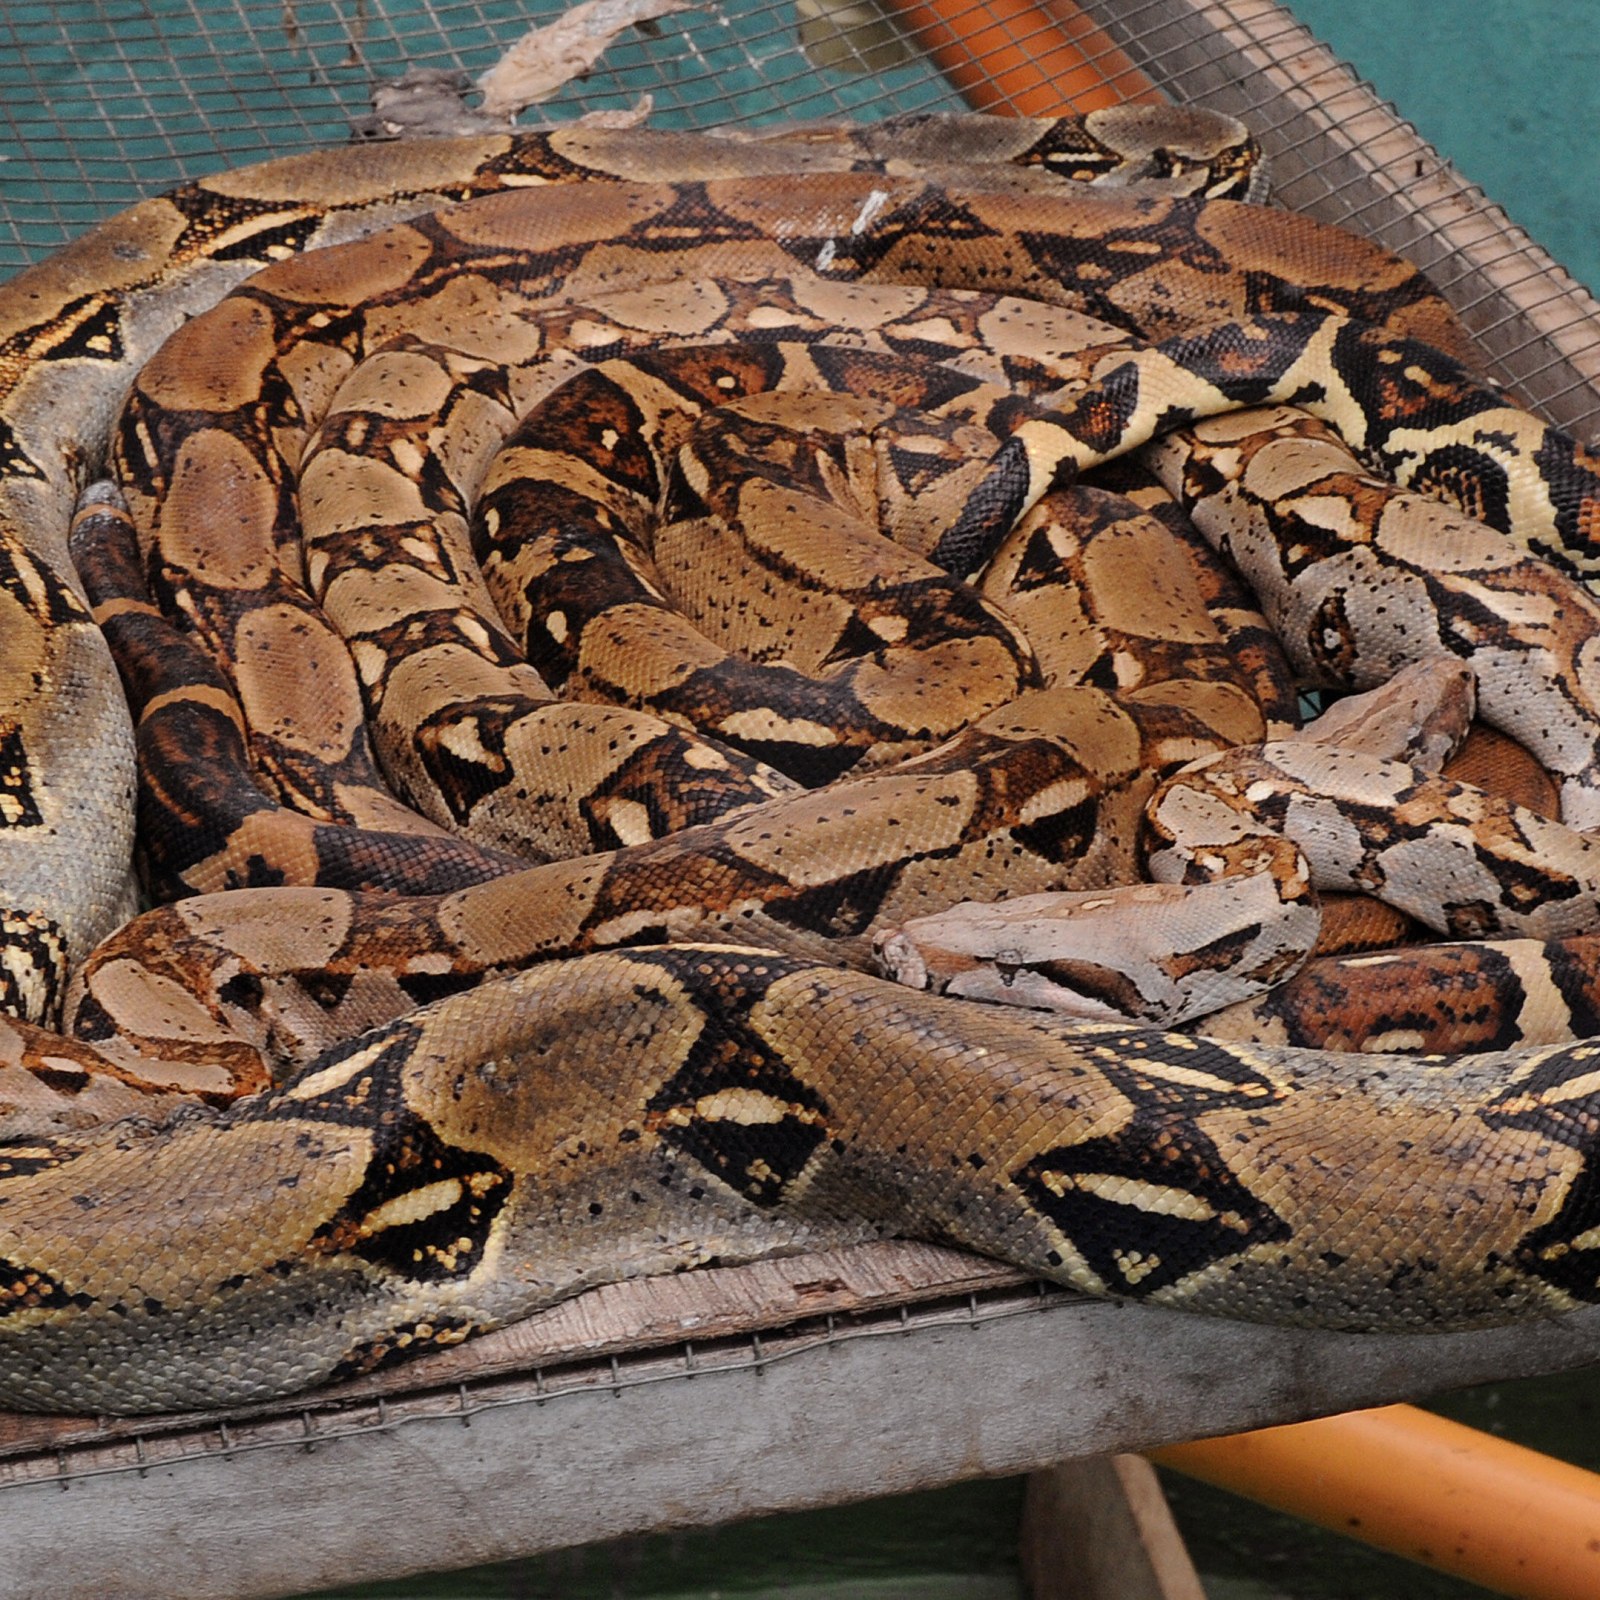 largest boa constrictor ever